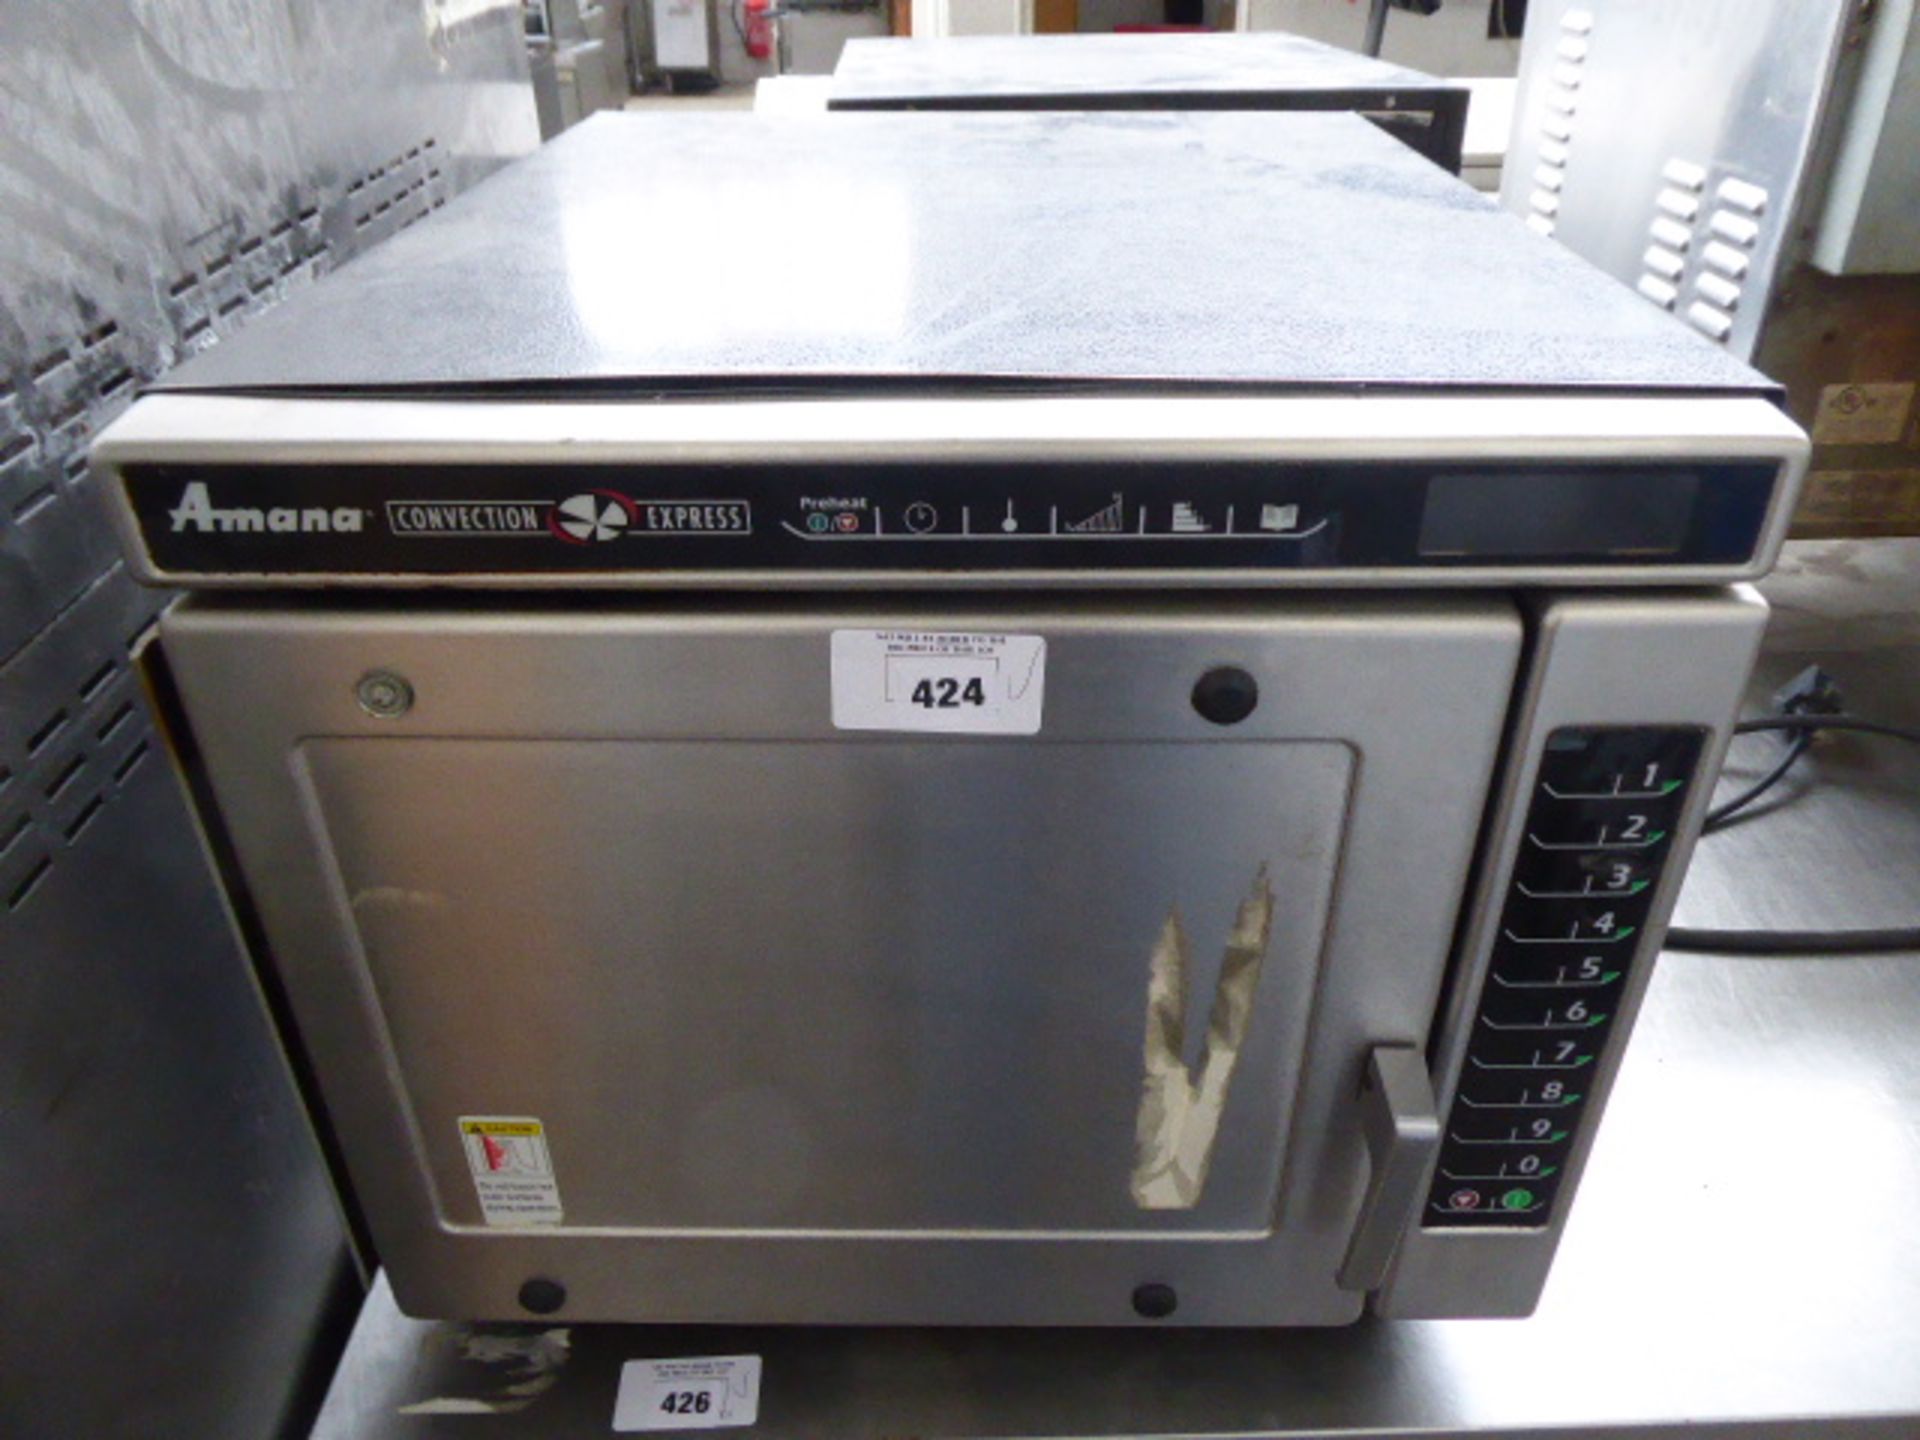 50cm Amana convection express combination microwave oven (44)